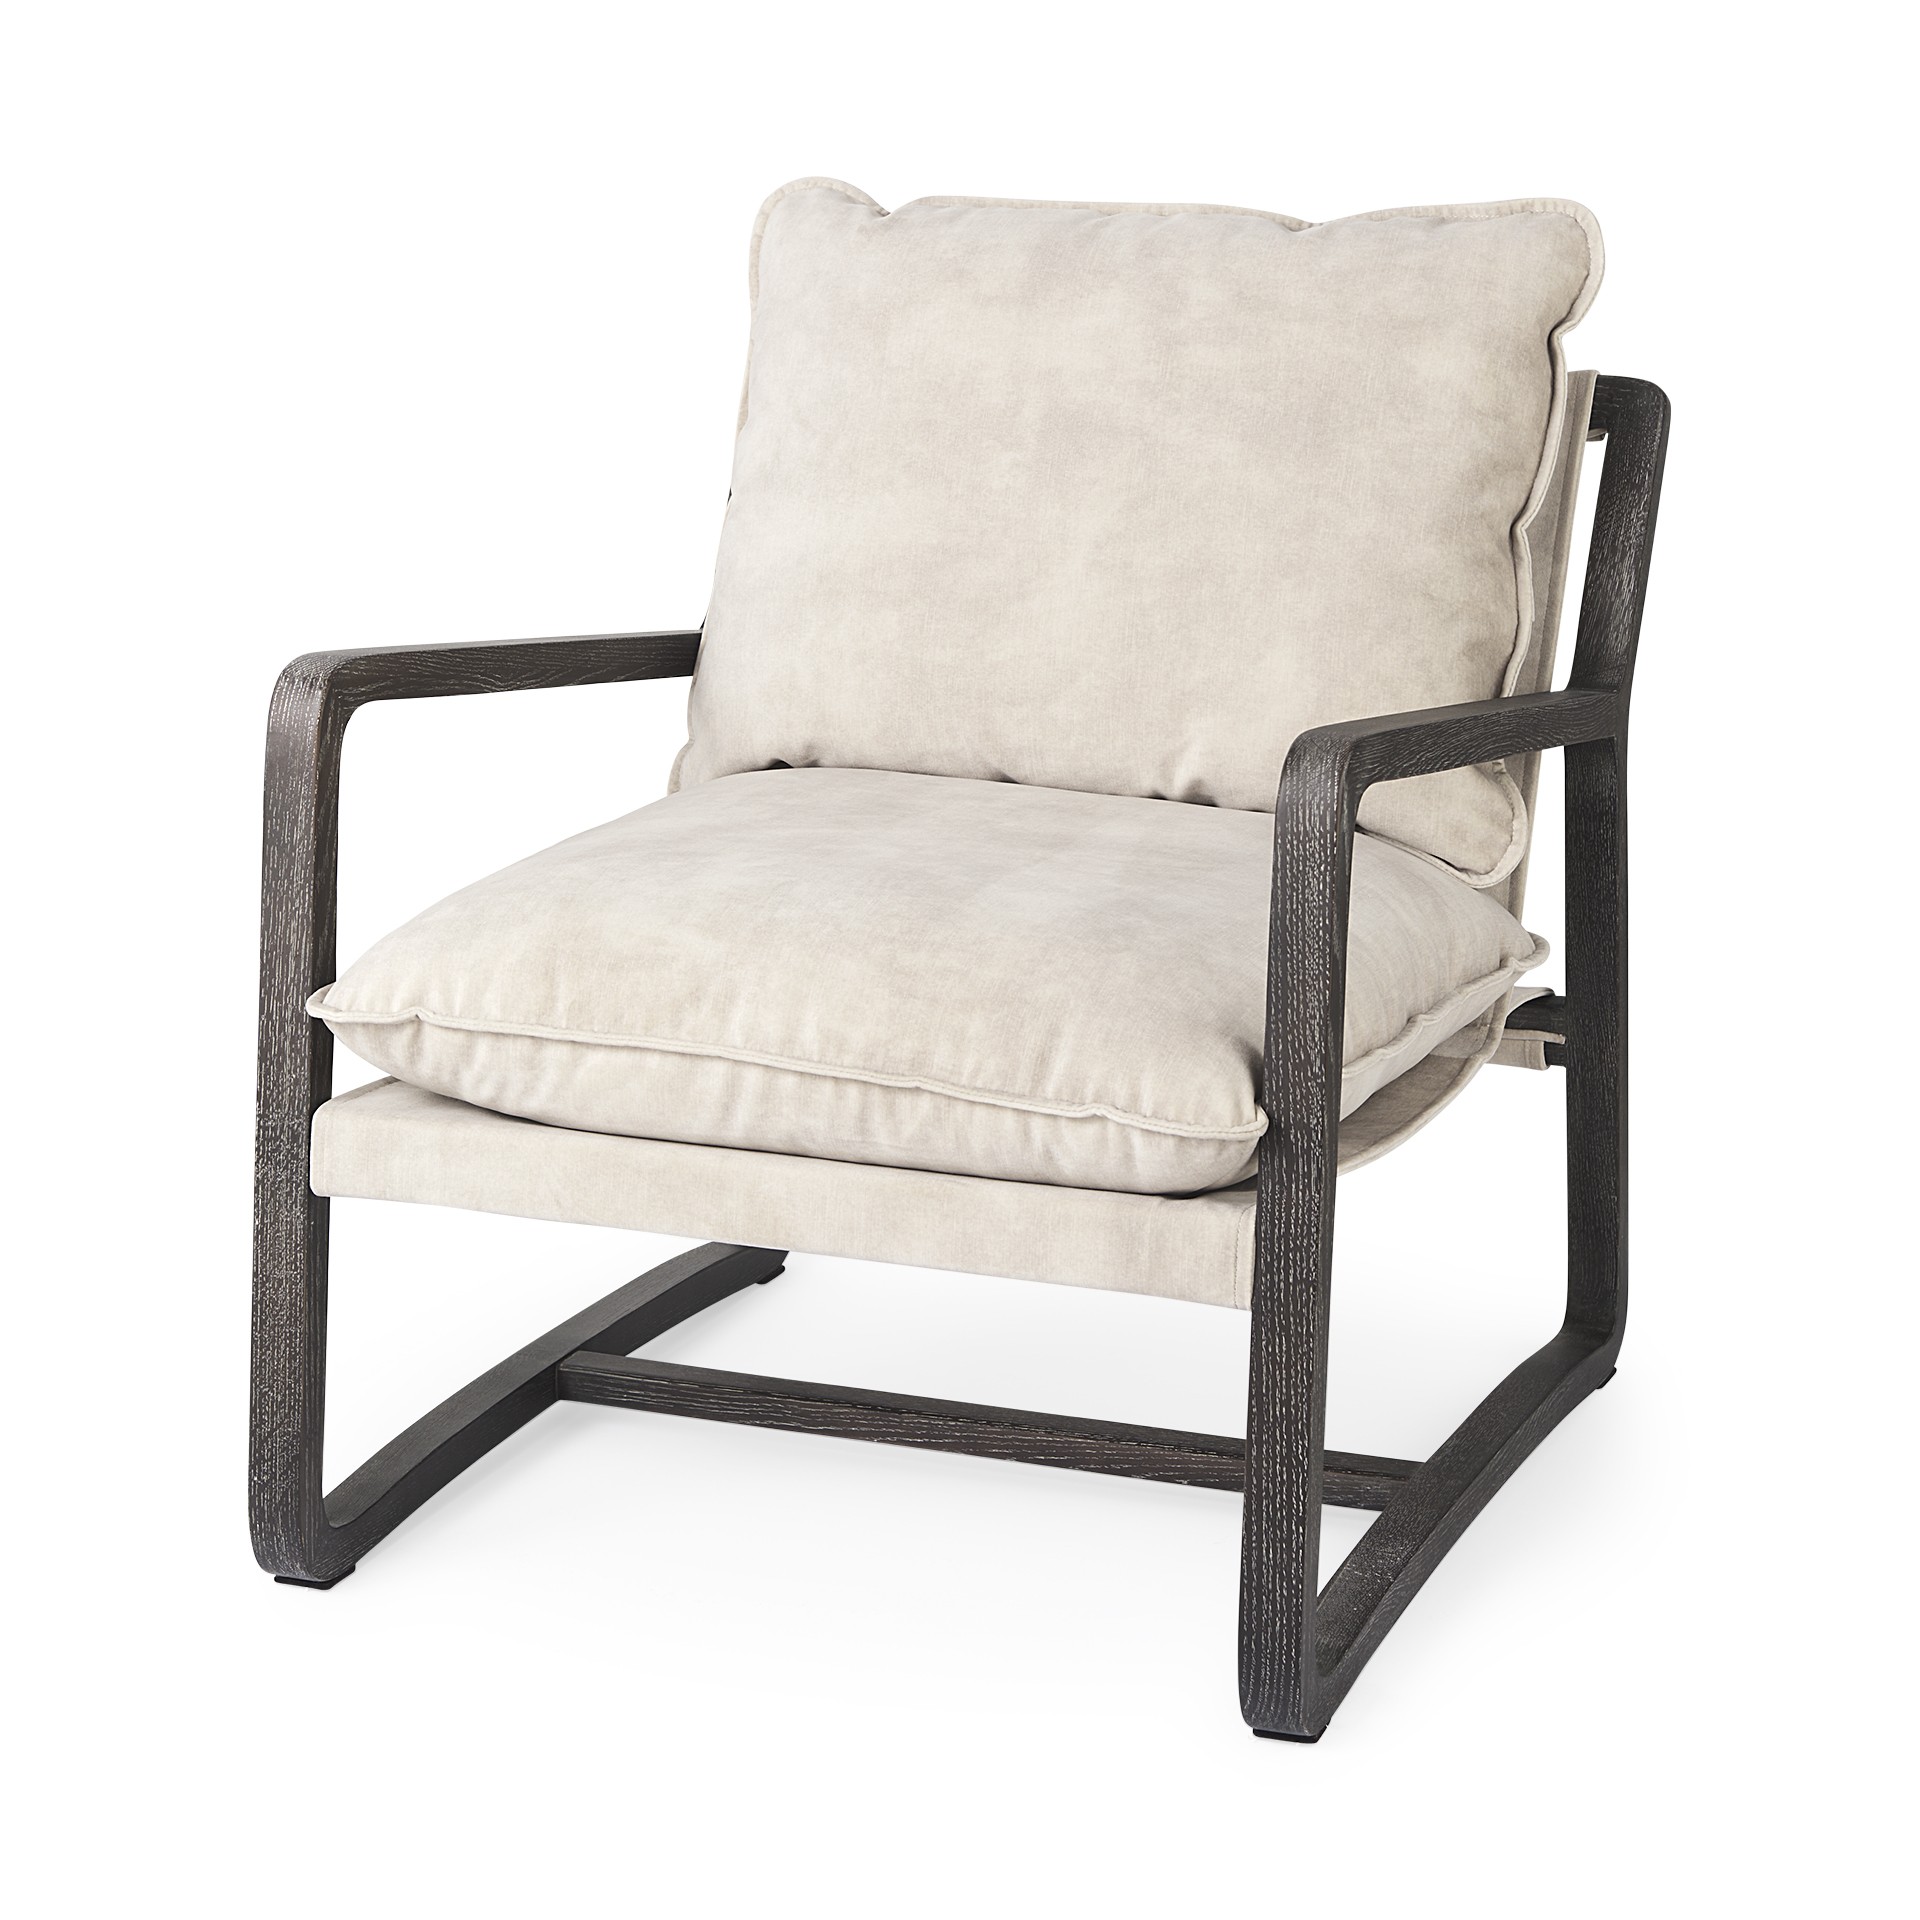 Modern Rustic Cozy Black And Cream Accent Chair-392007-1